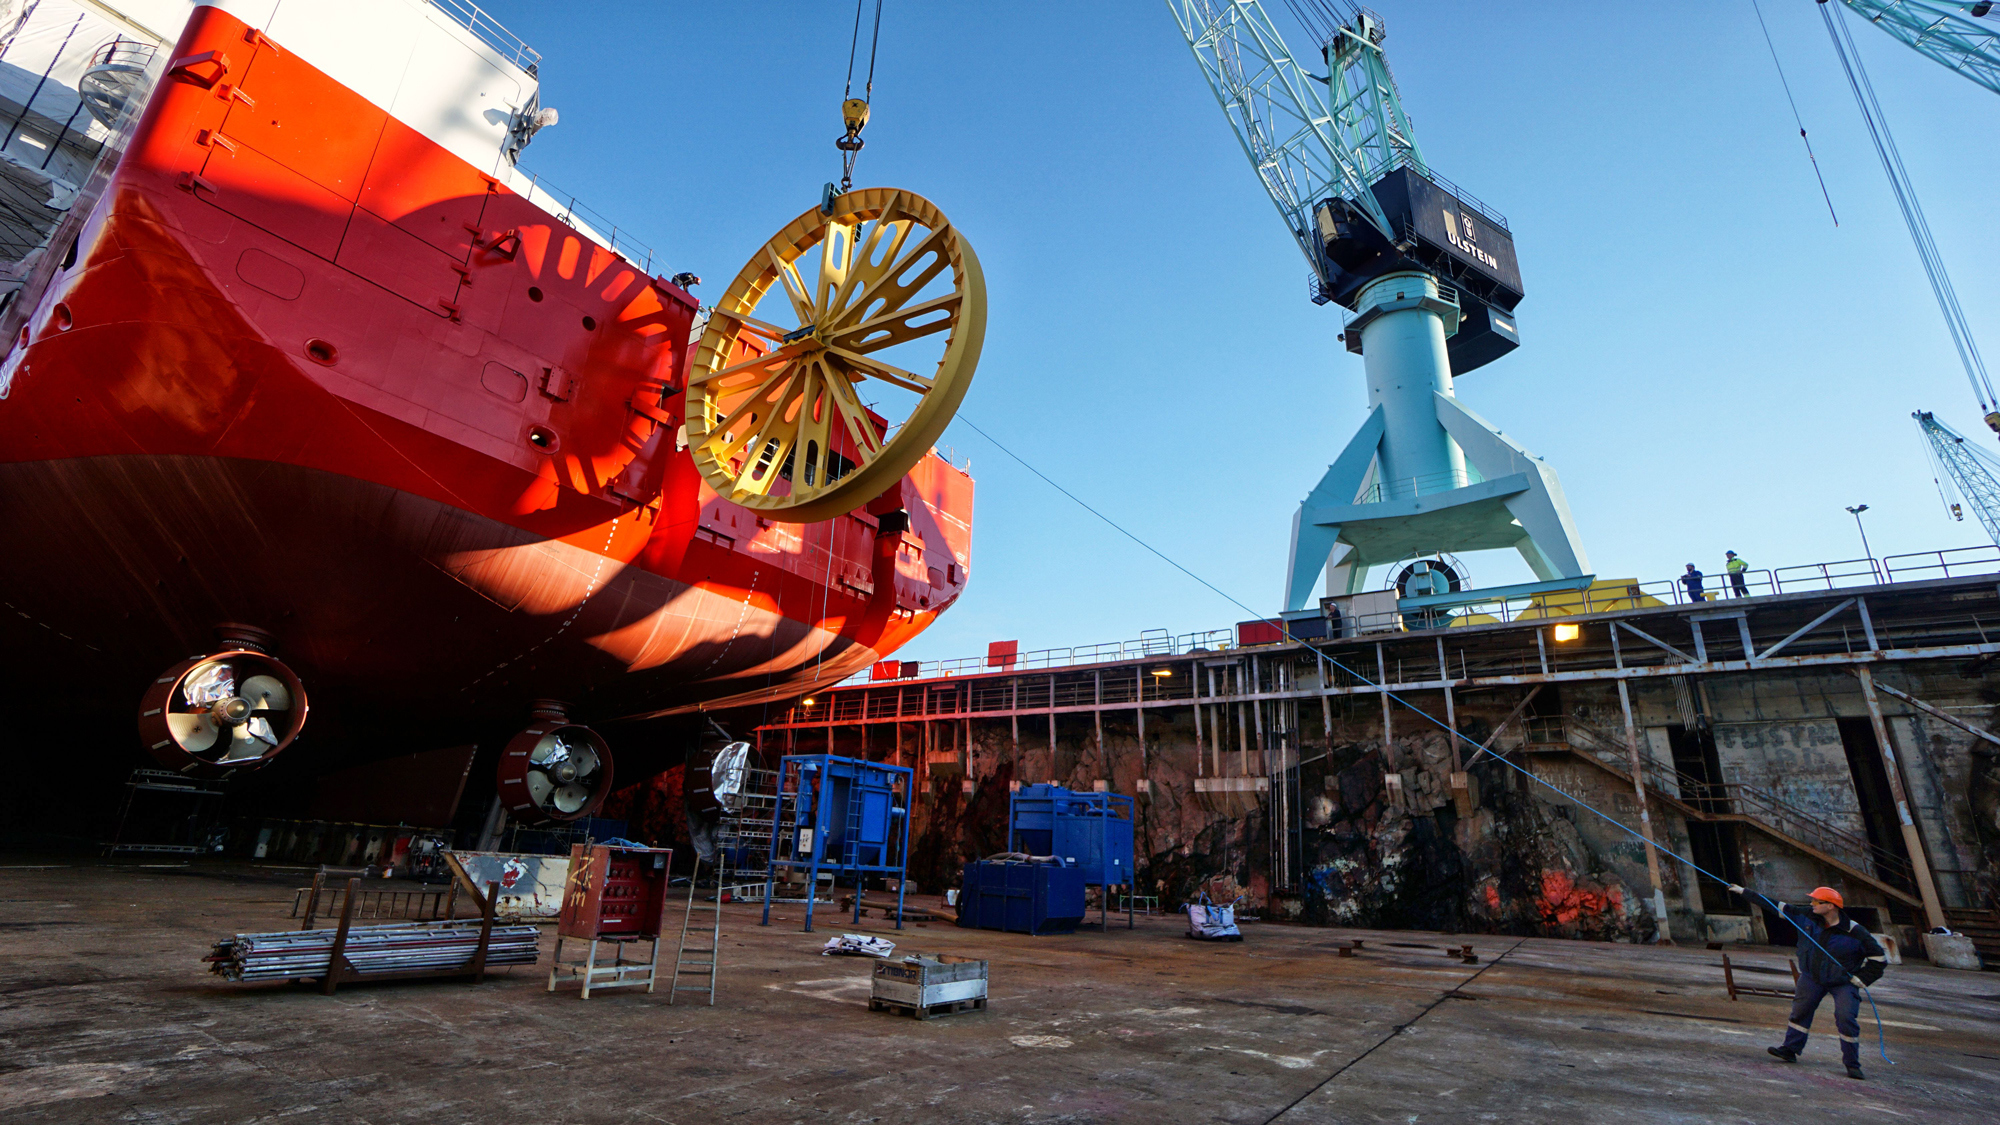 The first lay wheel about to be installed, photo by Daniel Osnes.